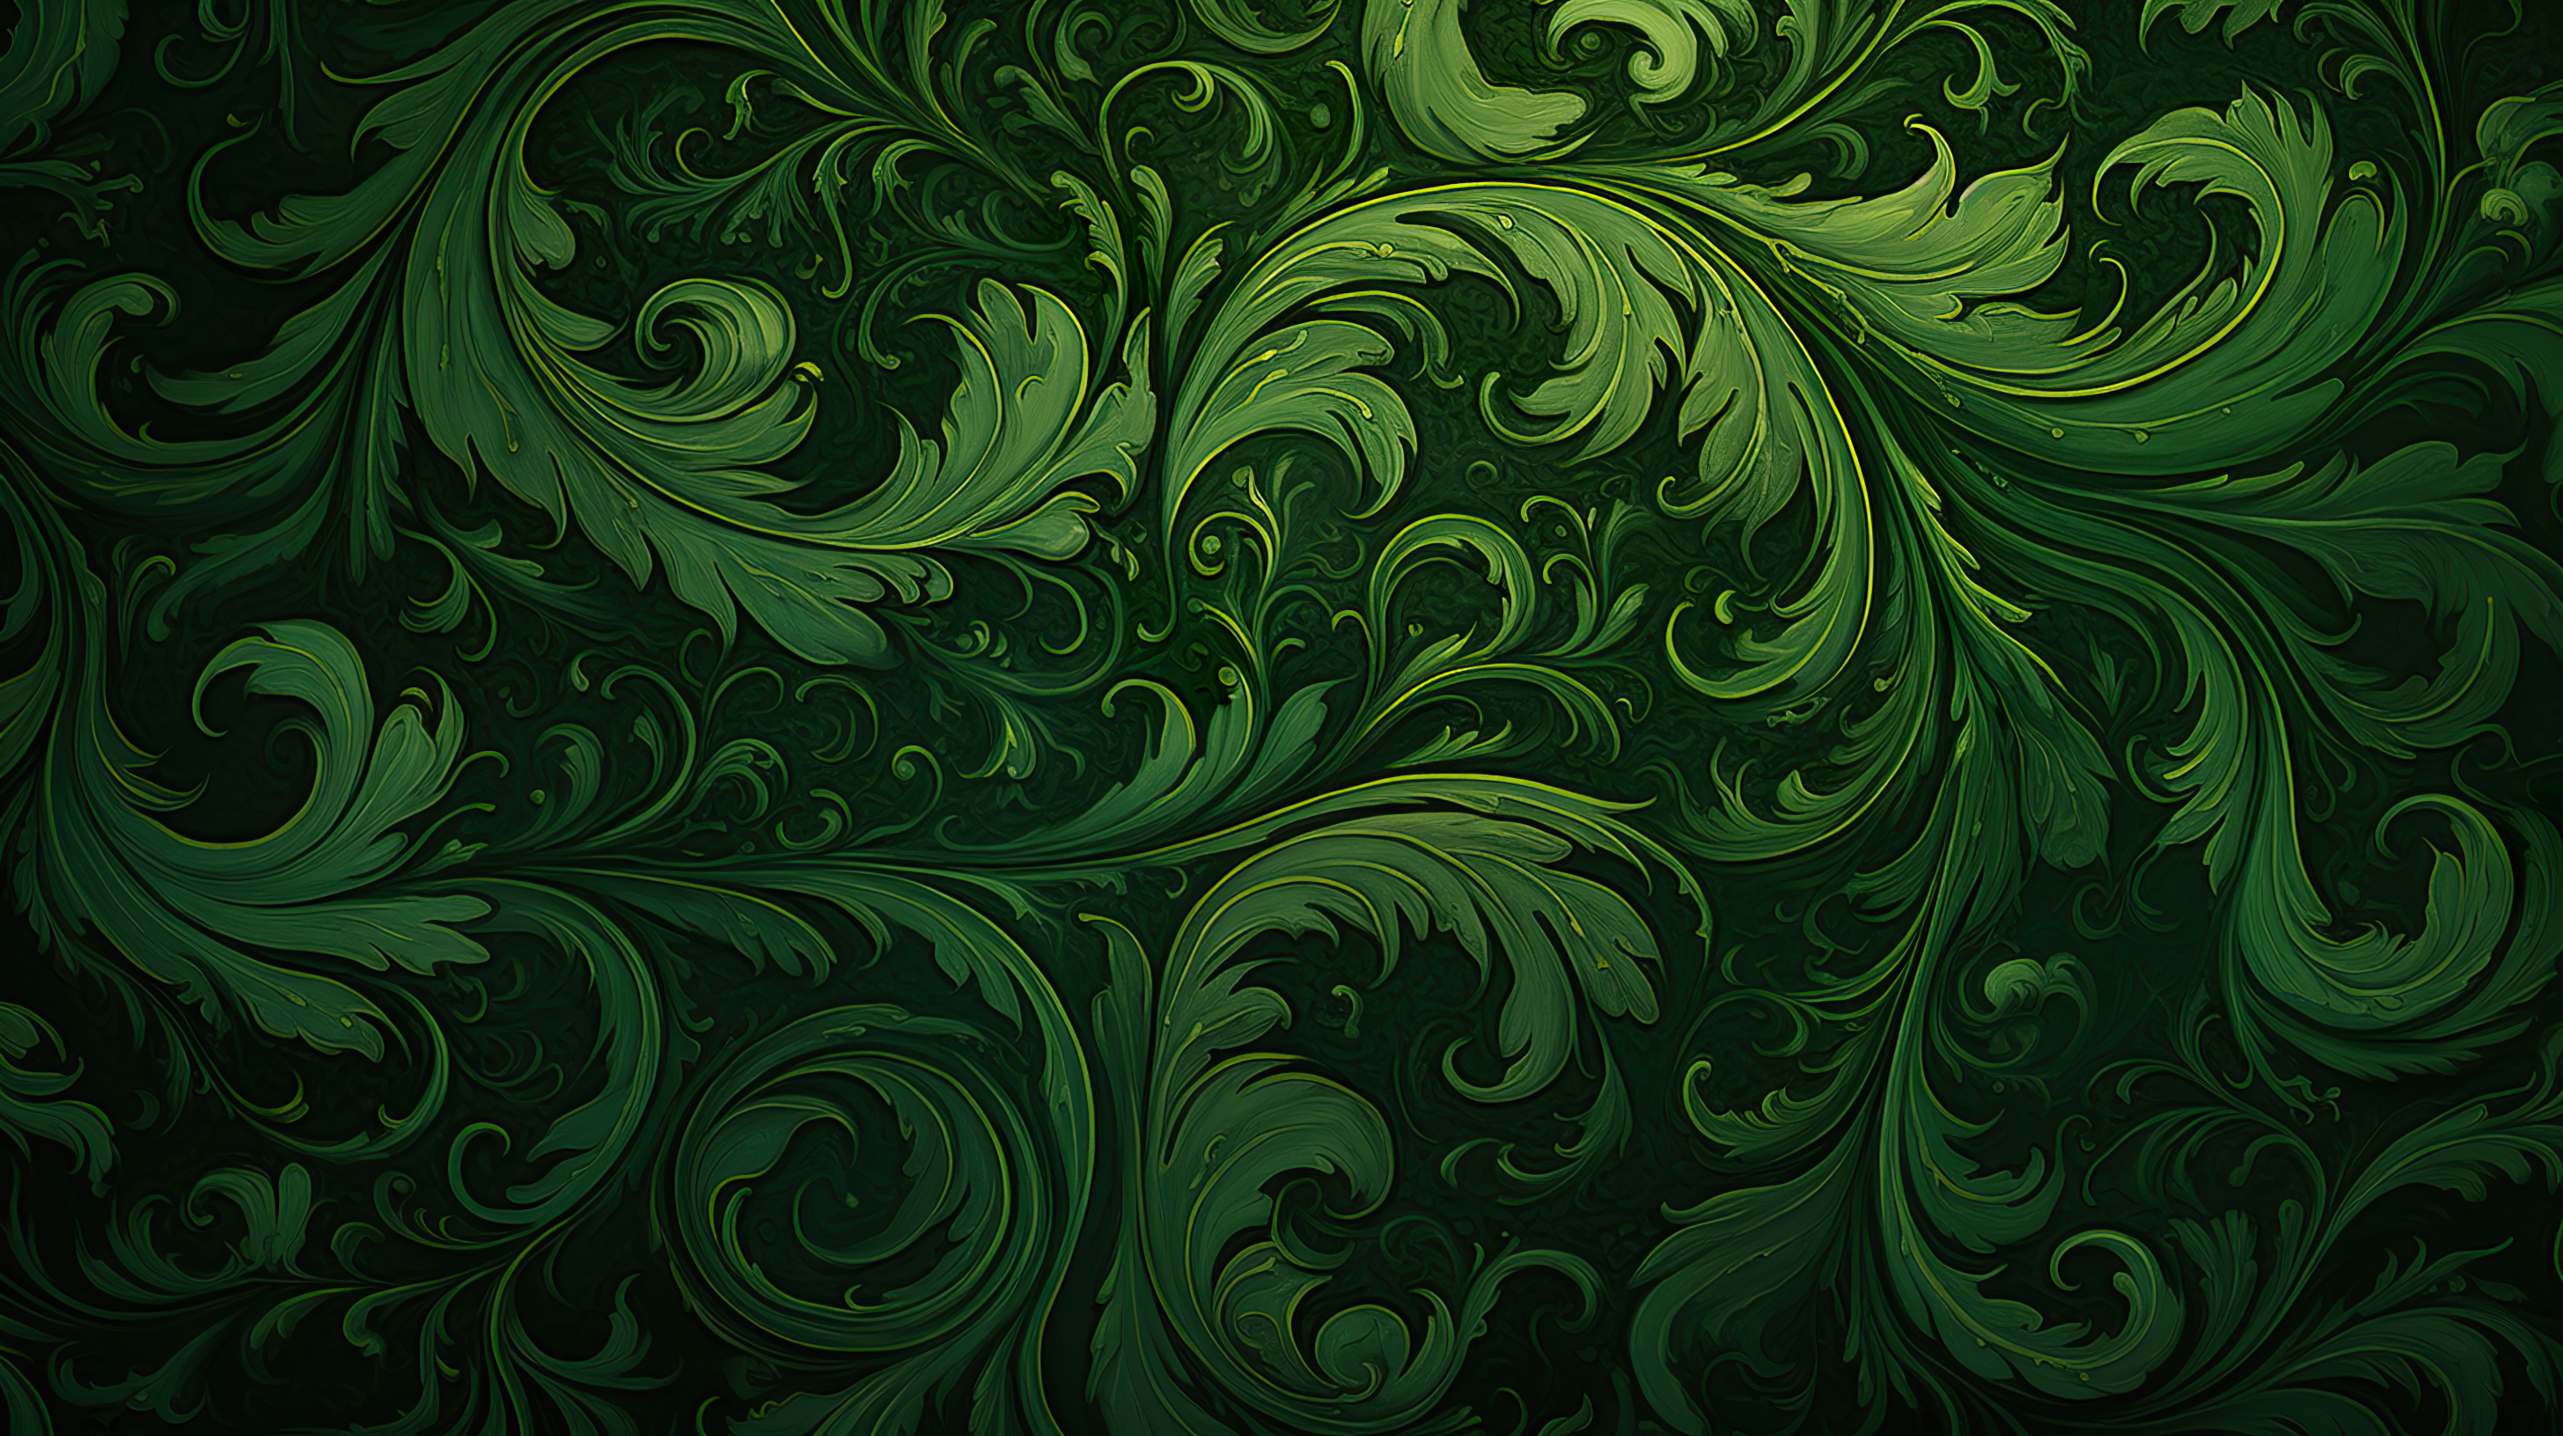 HD desktop wallpaper featuring an elegant green swirl pattern with aesthetic design ideal for a refined background.